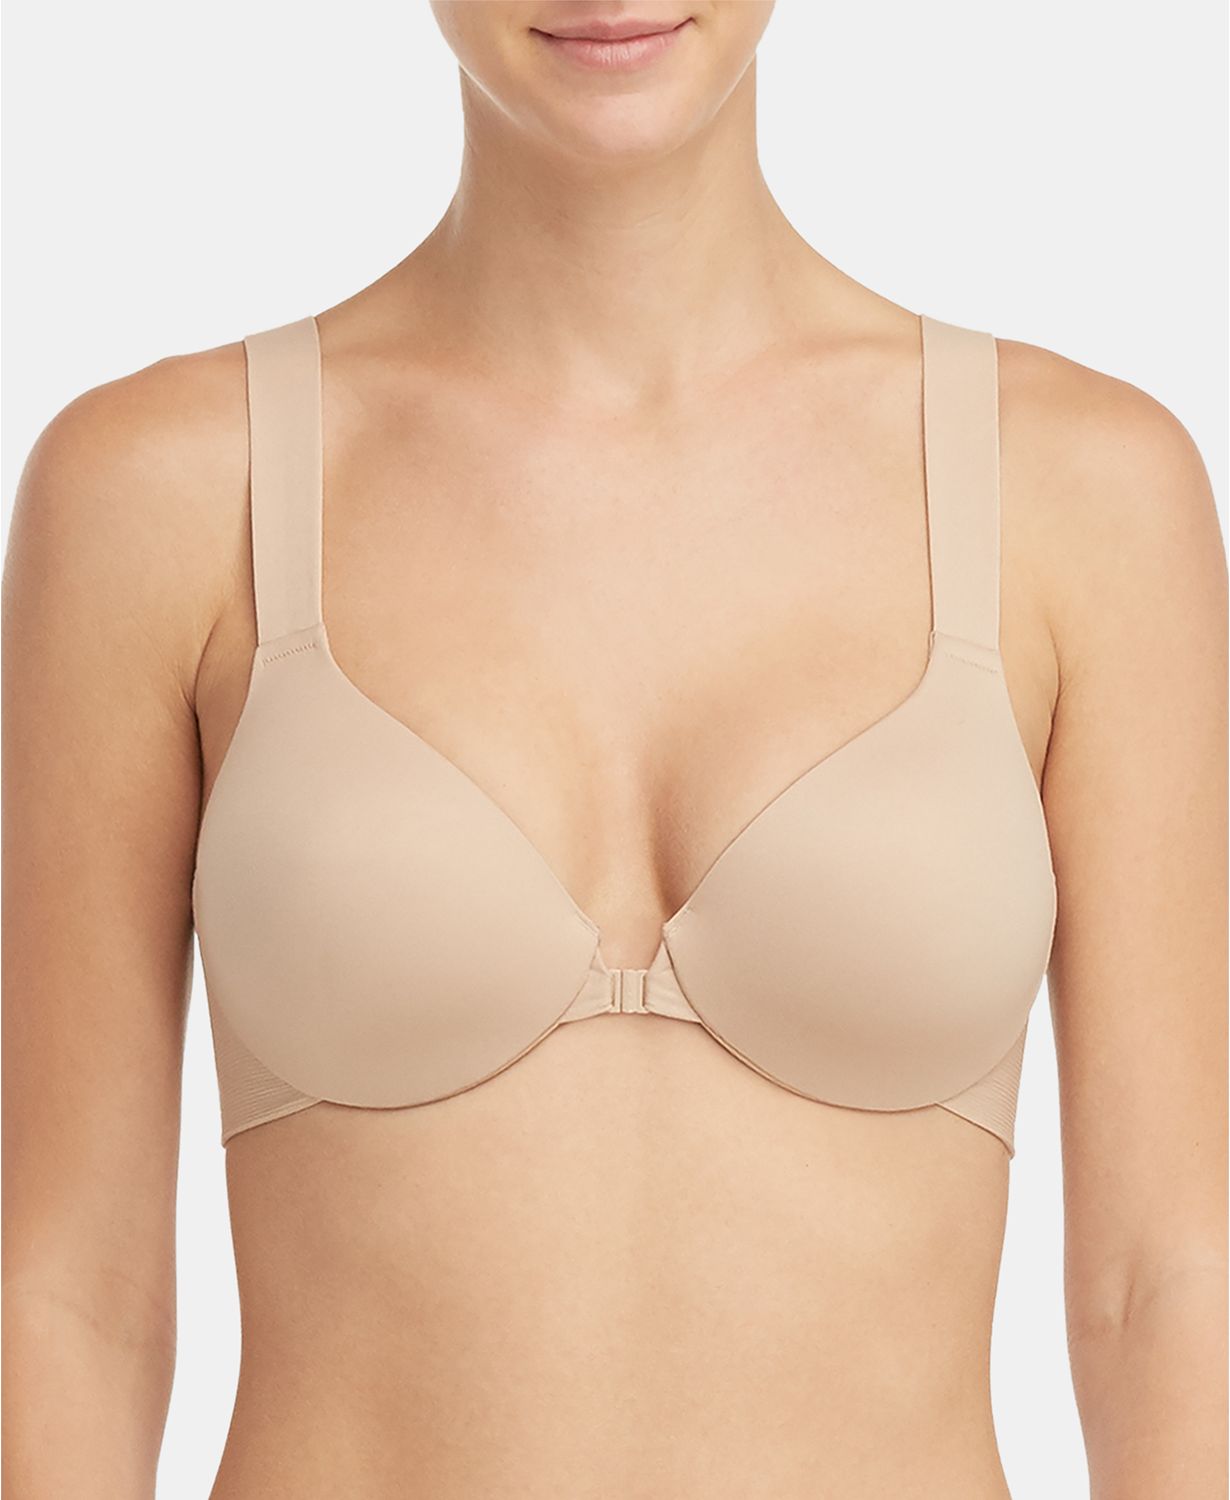 Tips for Buying a Bra With the Perfect Fit – Fashion Gone Rogue